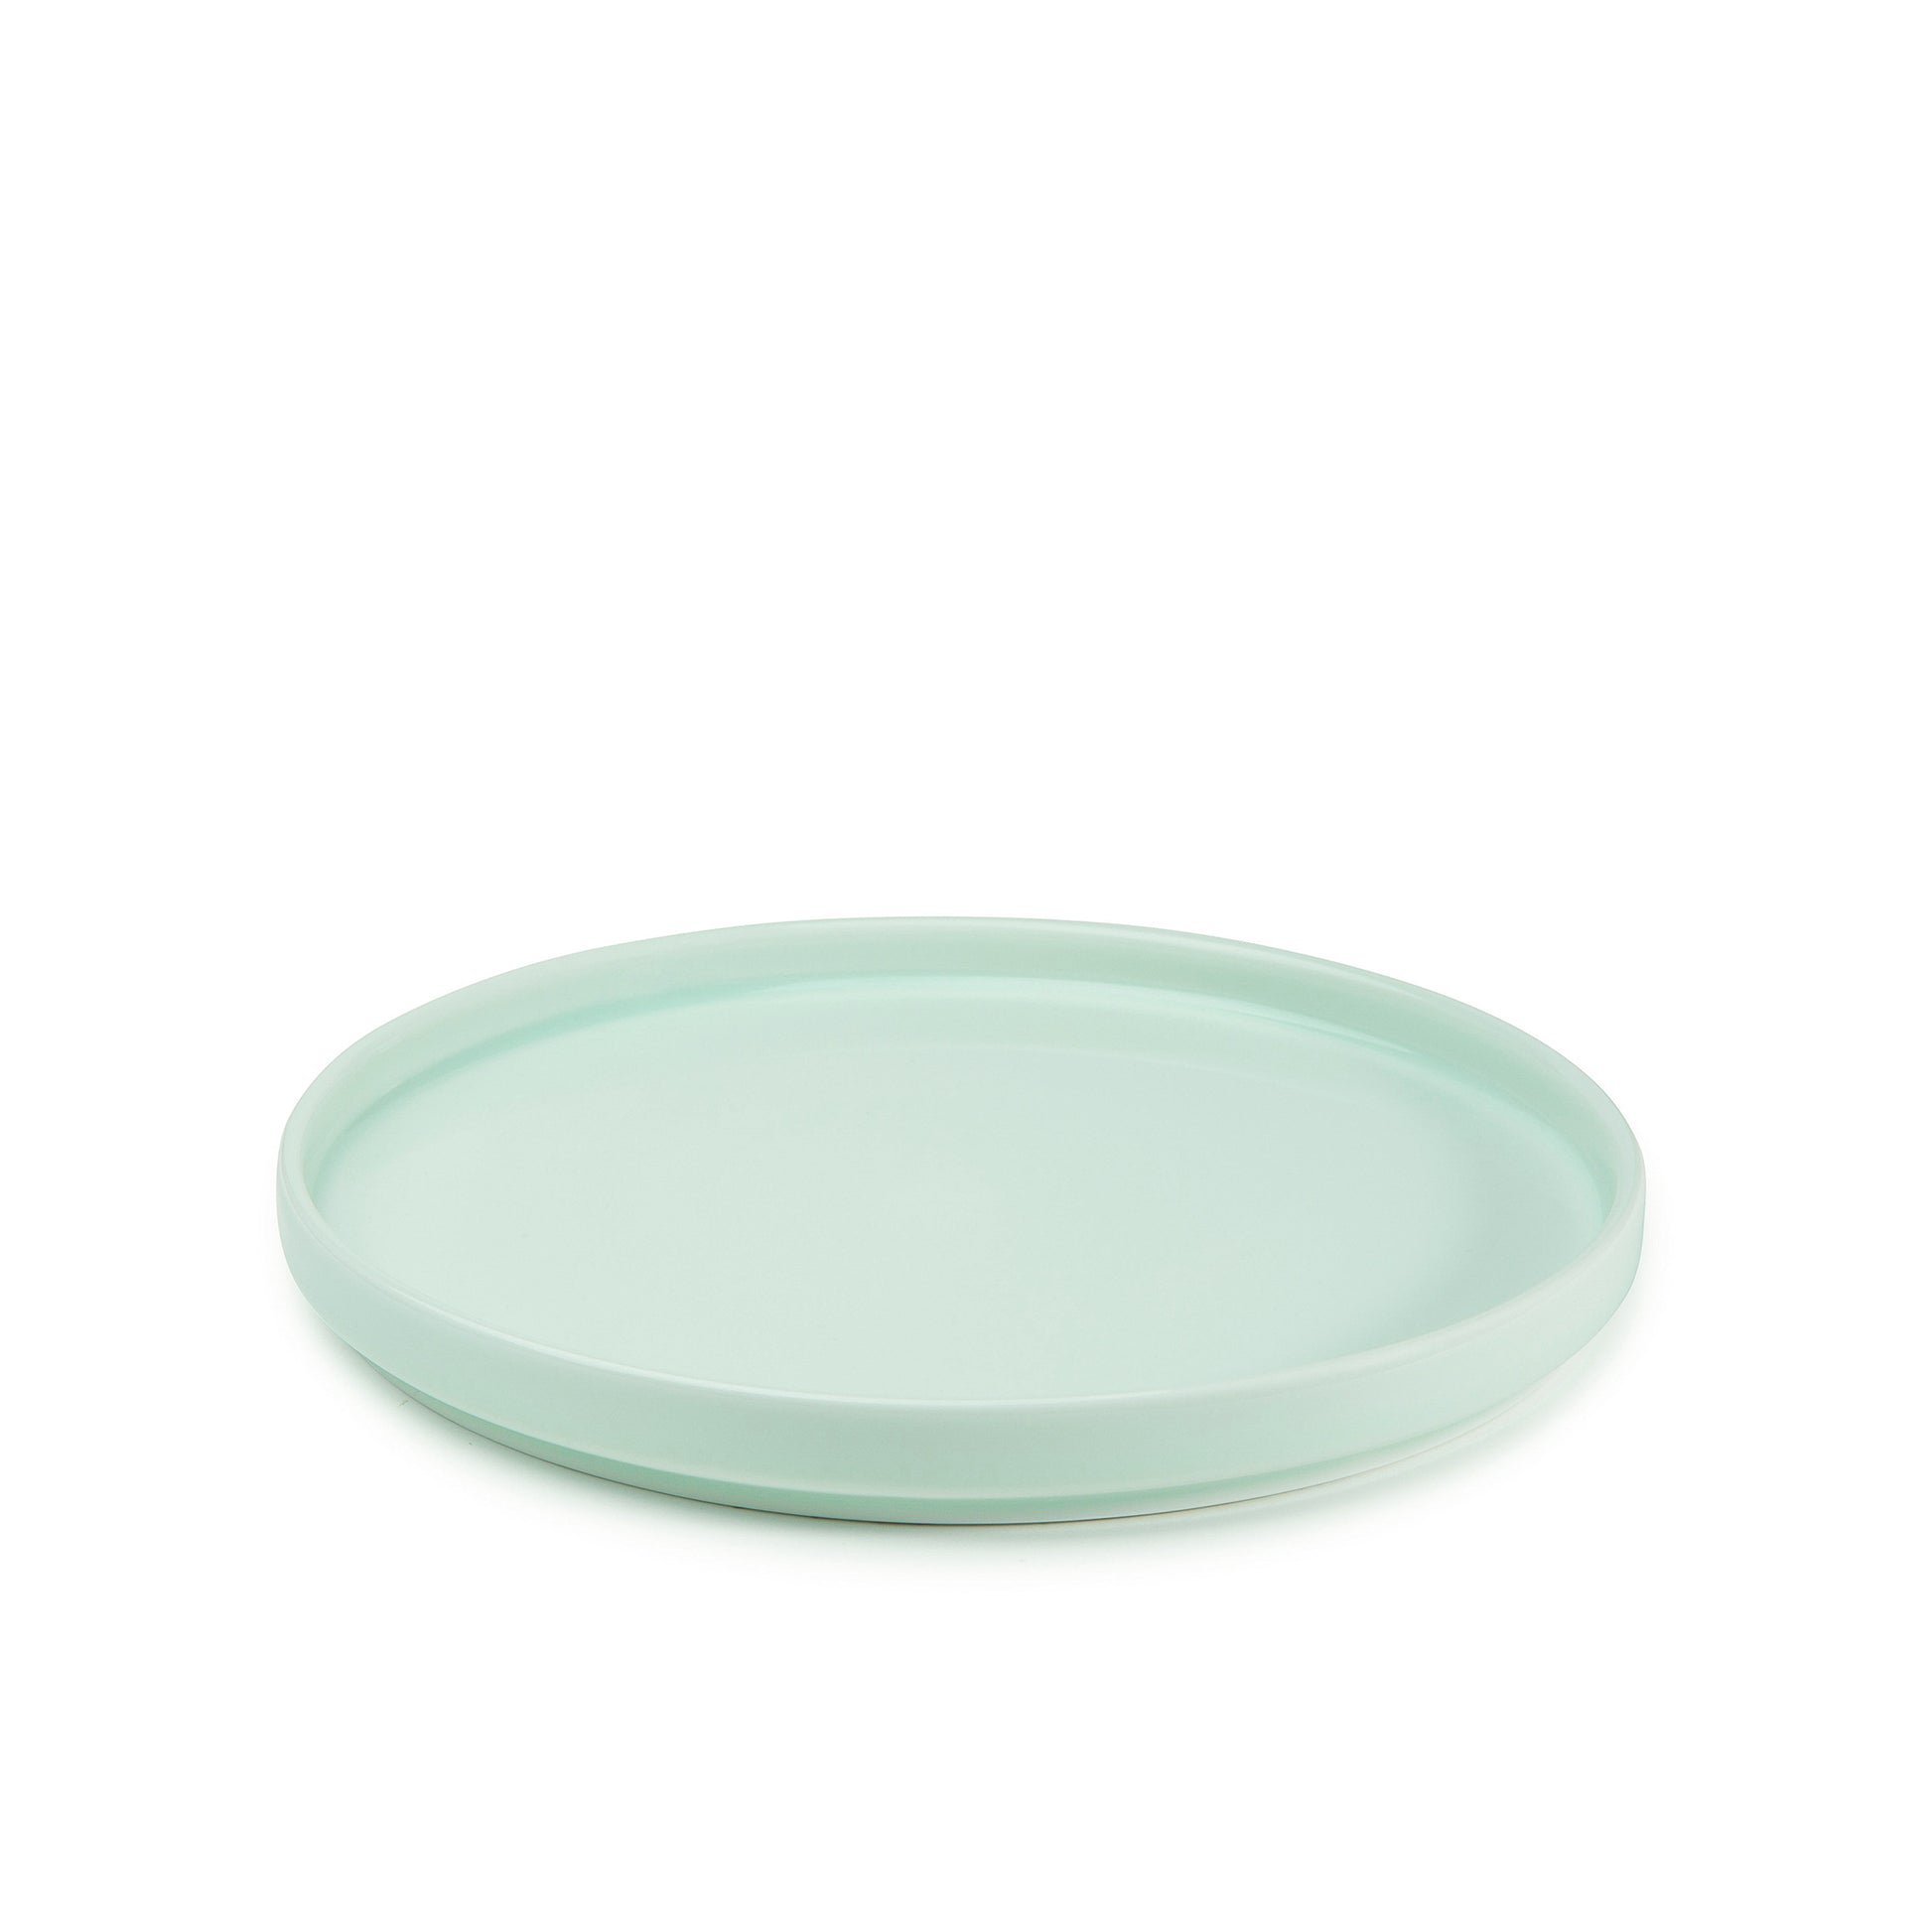 11" green celadon porcelain straight-sided dinner plate, 30 degree angle view, media 1 of 5